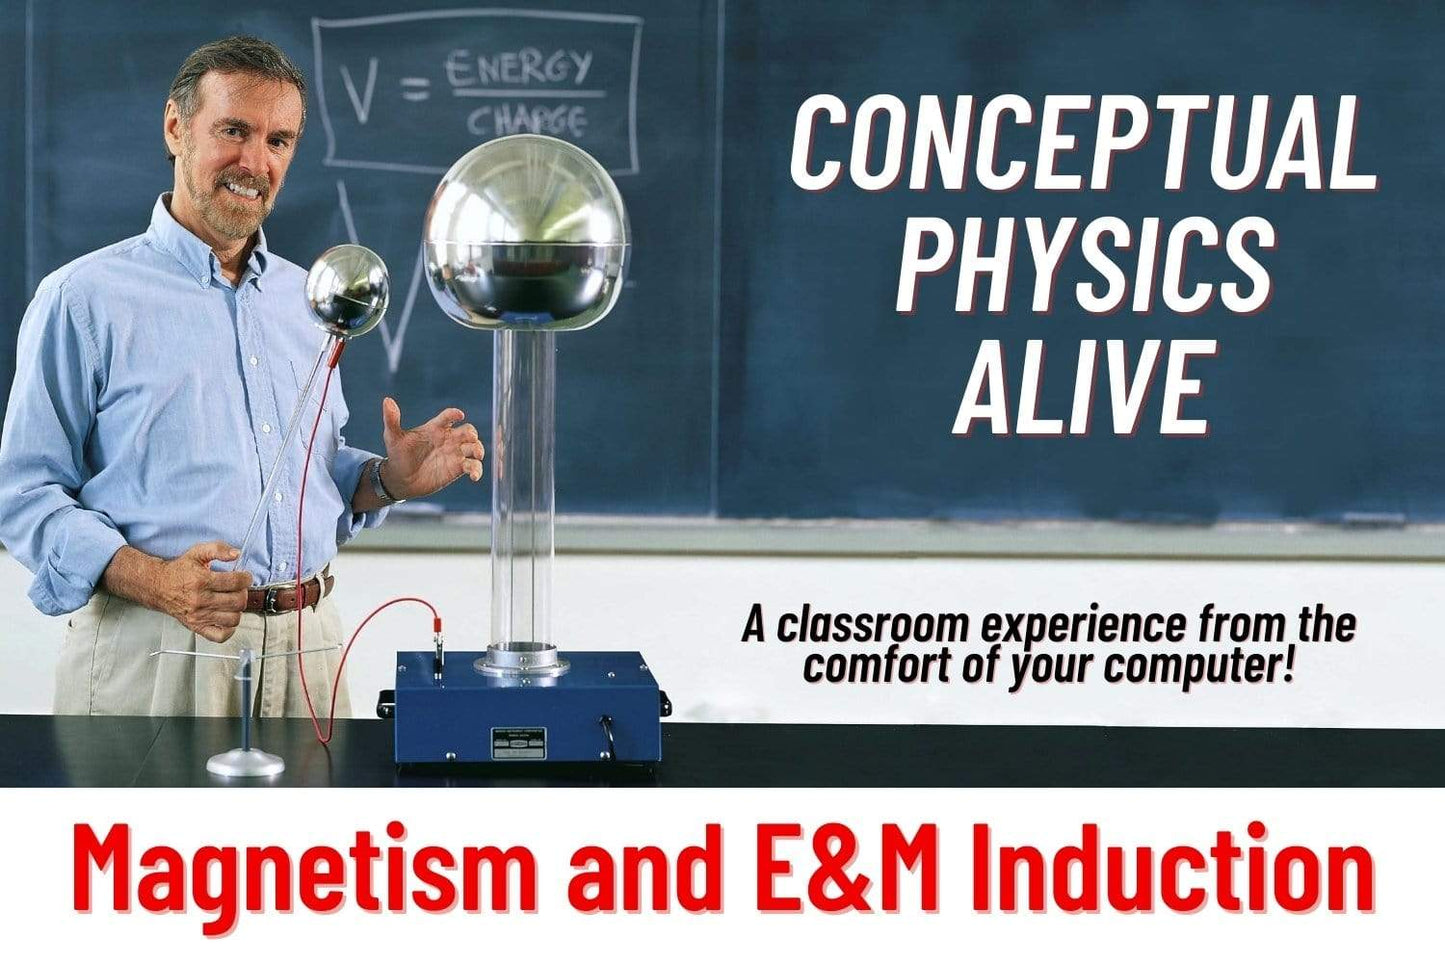 Arbor Scientific Conceptual Physics Alive: Magnetism and E&M Induction